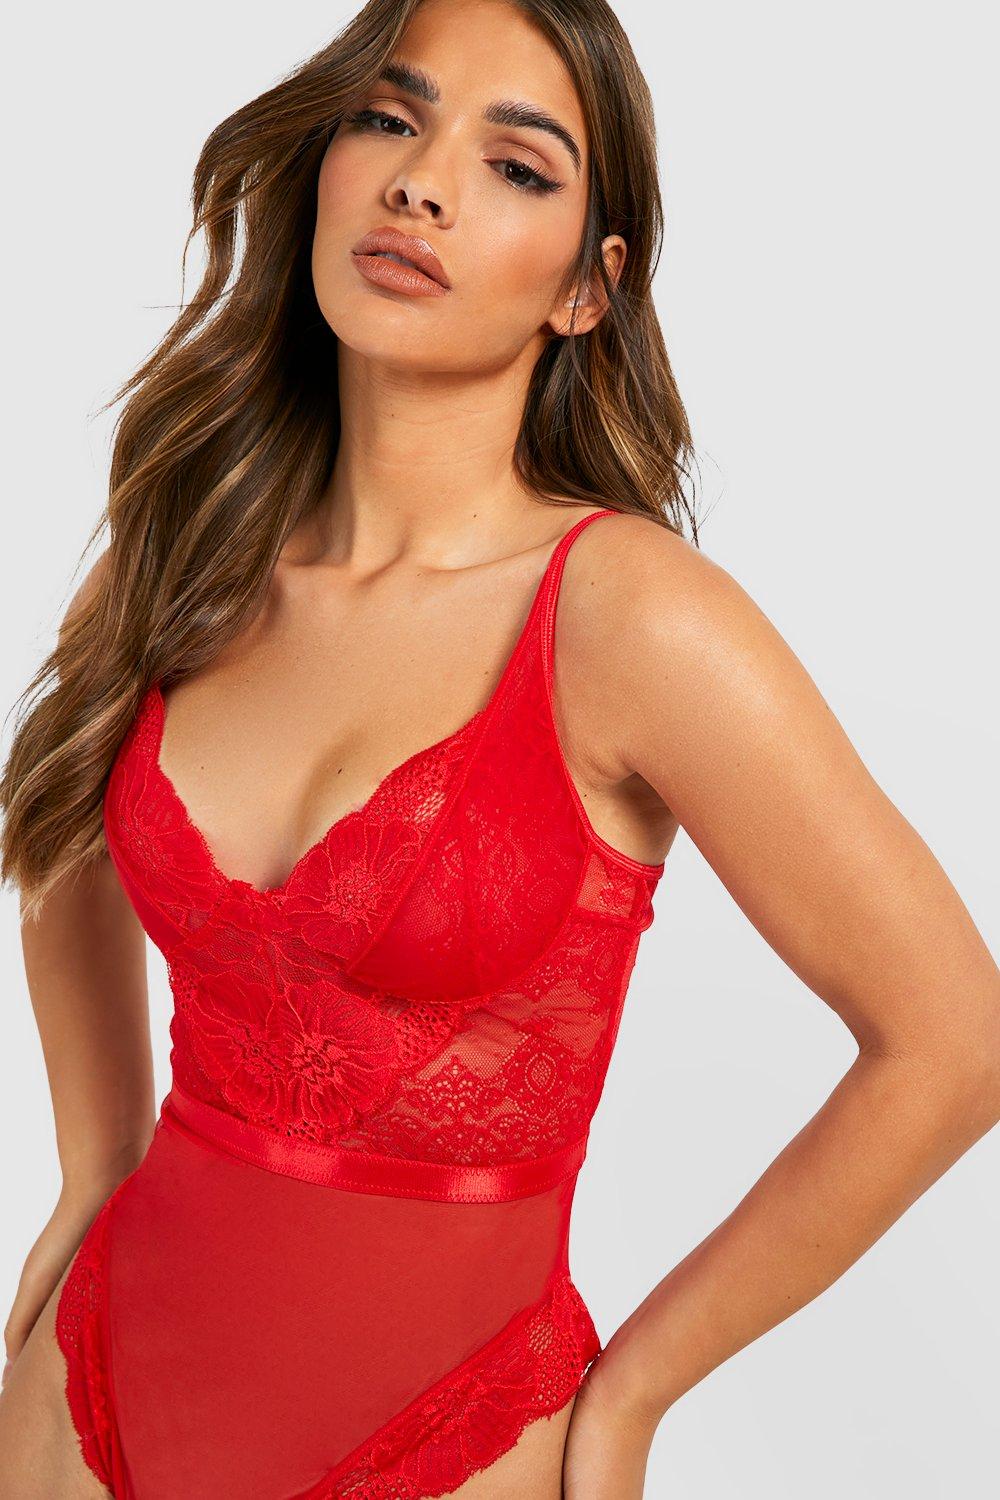 https://media.boohoo.com/i/boohoo/lzz89215_red_xl/female-red-lace-and-mesh-bodysuit